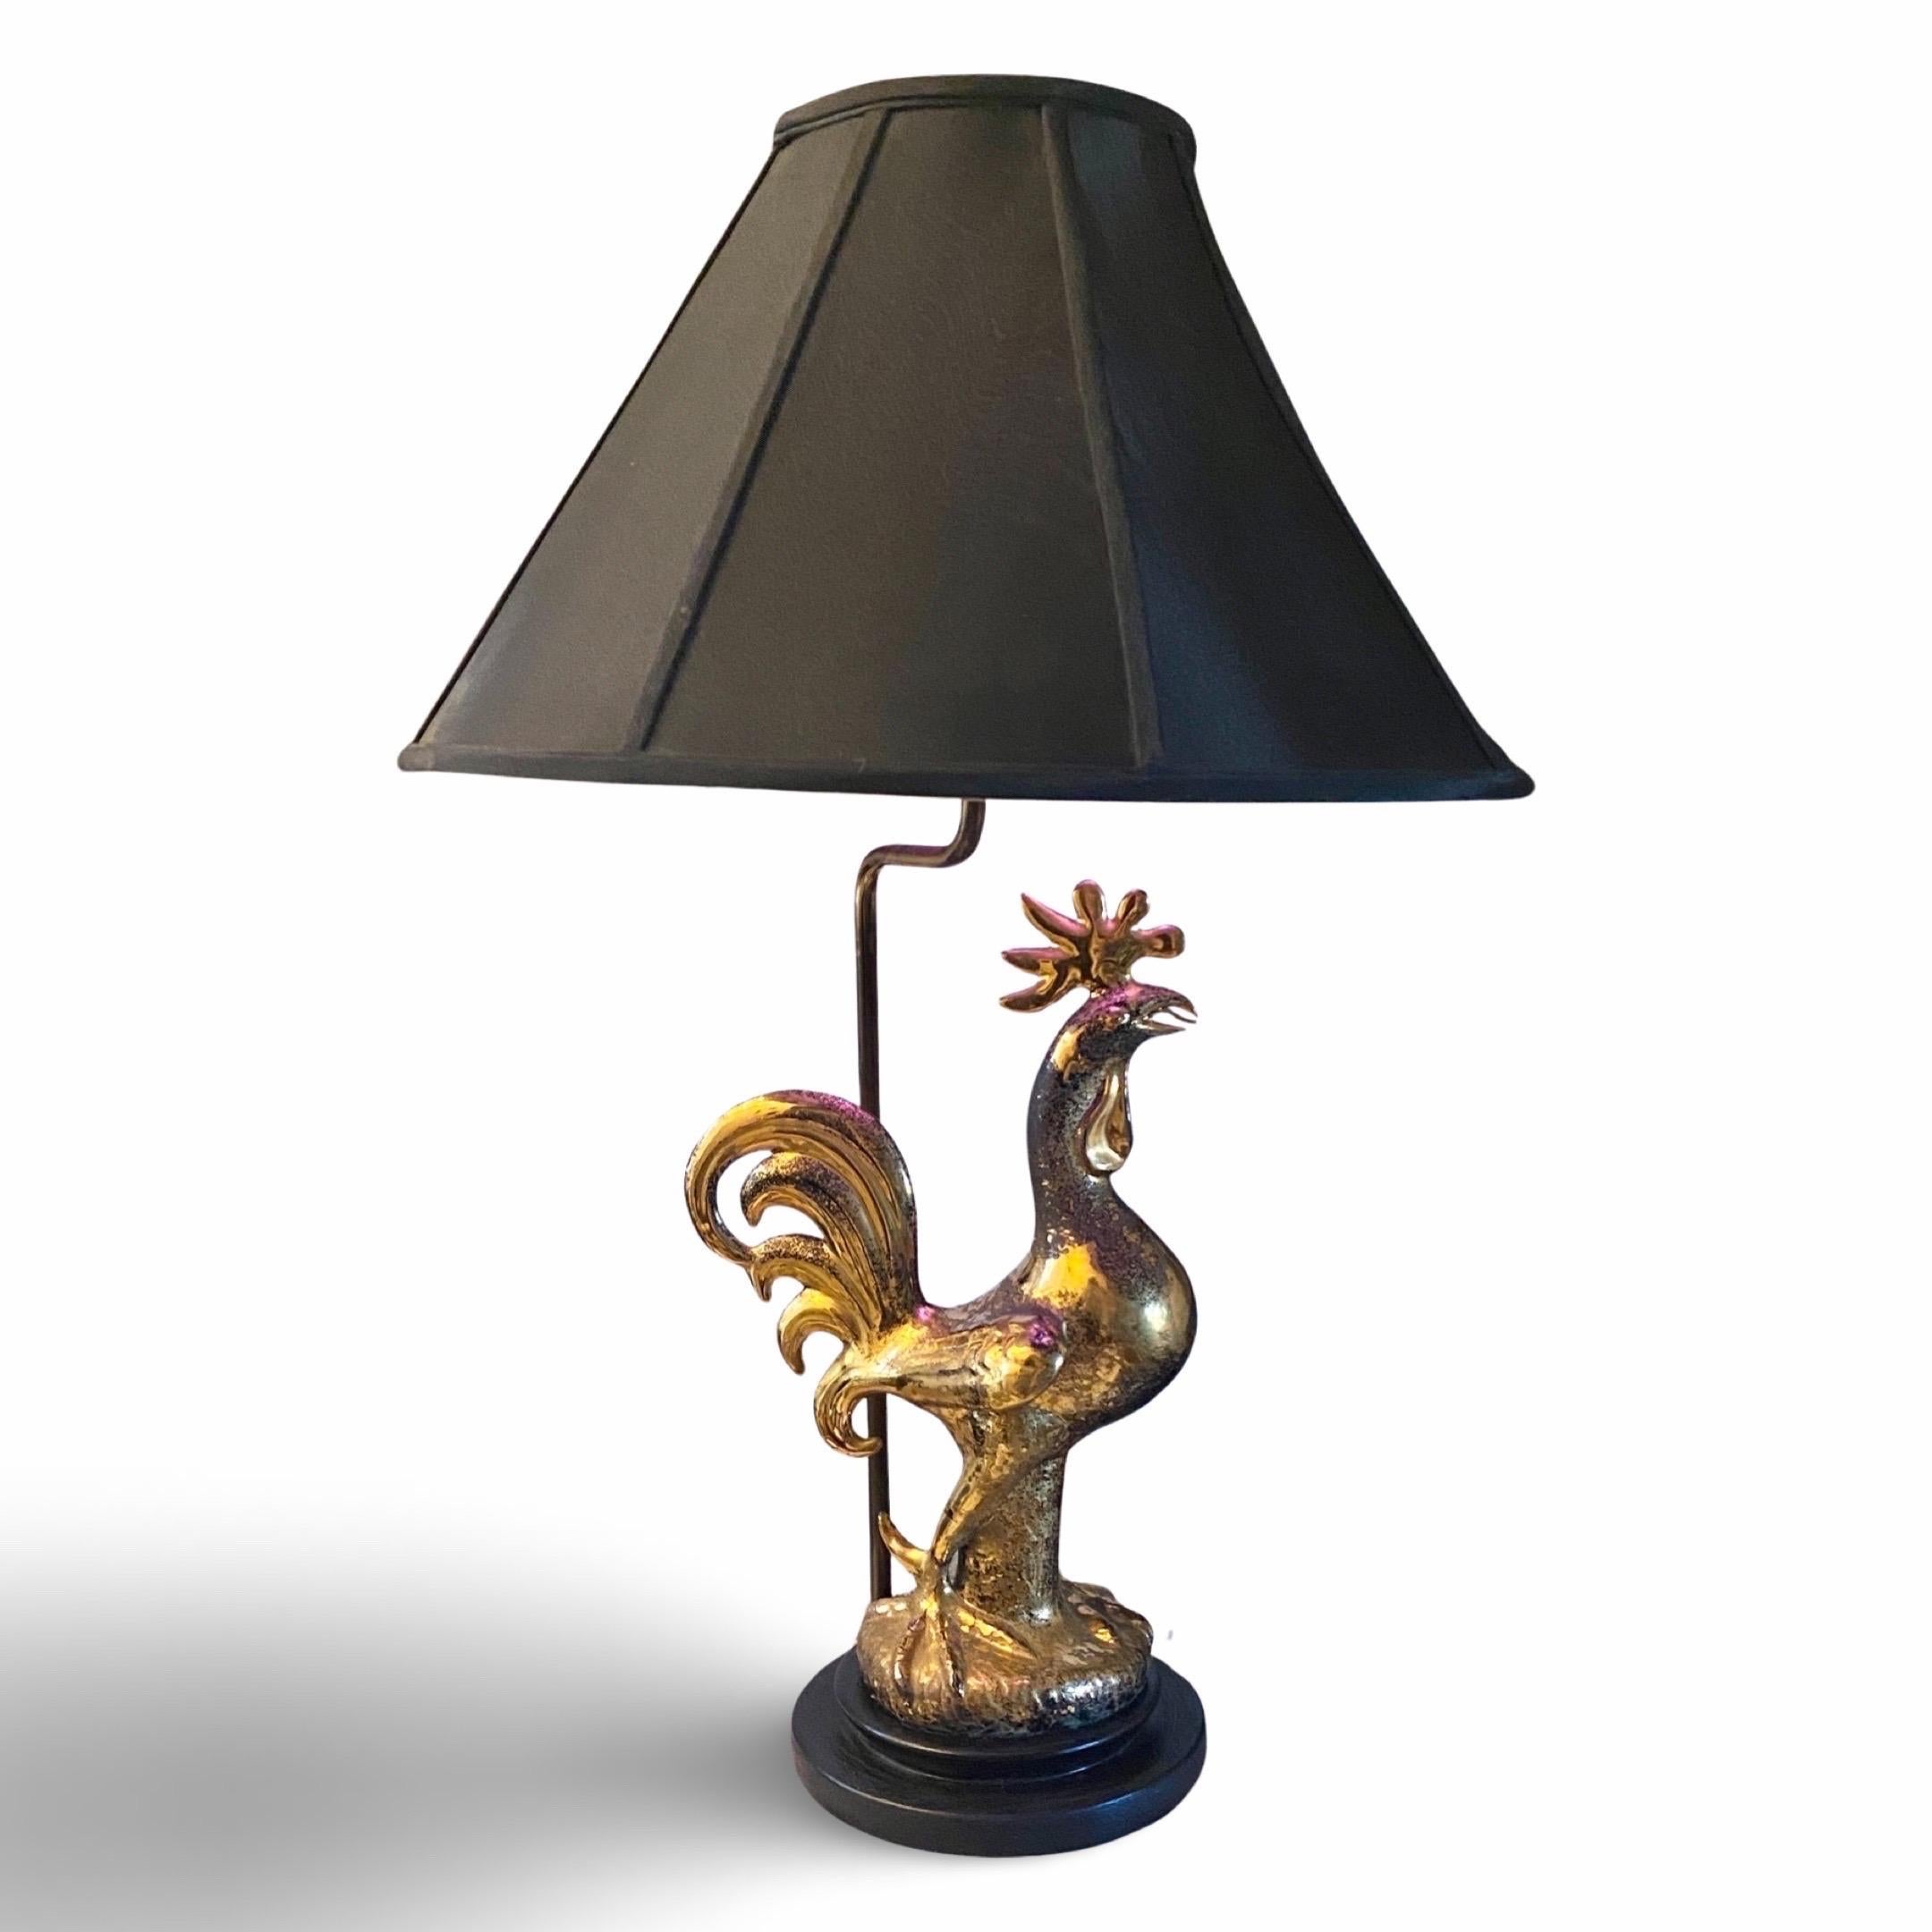 This Sasha Brastoff lamp is one of a kind and was made for a personal friend of Mr. Brastoff. It is highly collectible and desirable because it is a hand made sculpture of a rooster. A rooster was Mr. Brastoff’s logo. It has a history and great